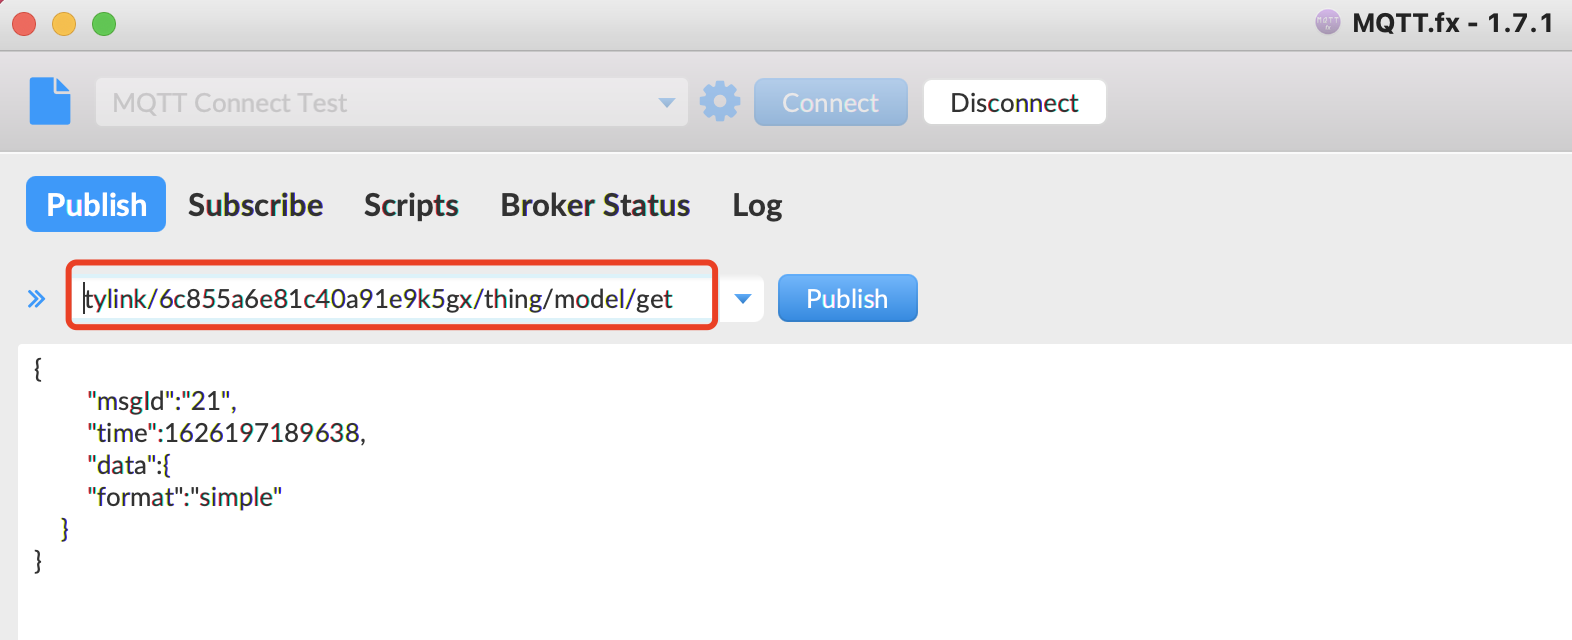 Device Connection Using MQTT.fx